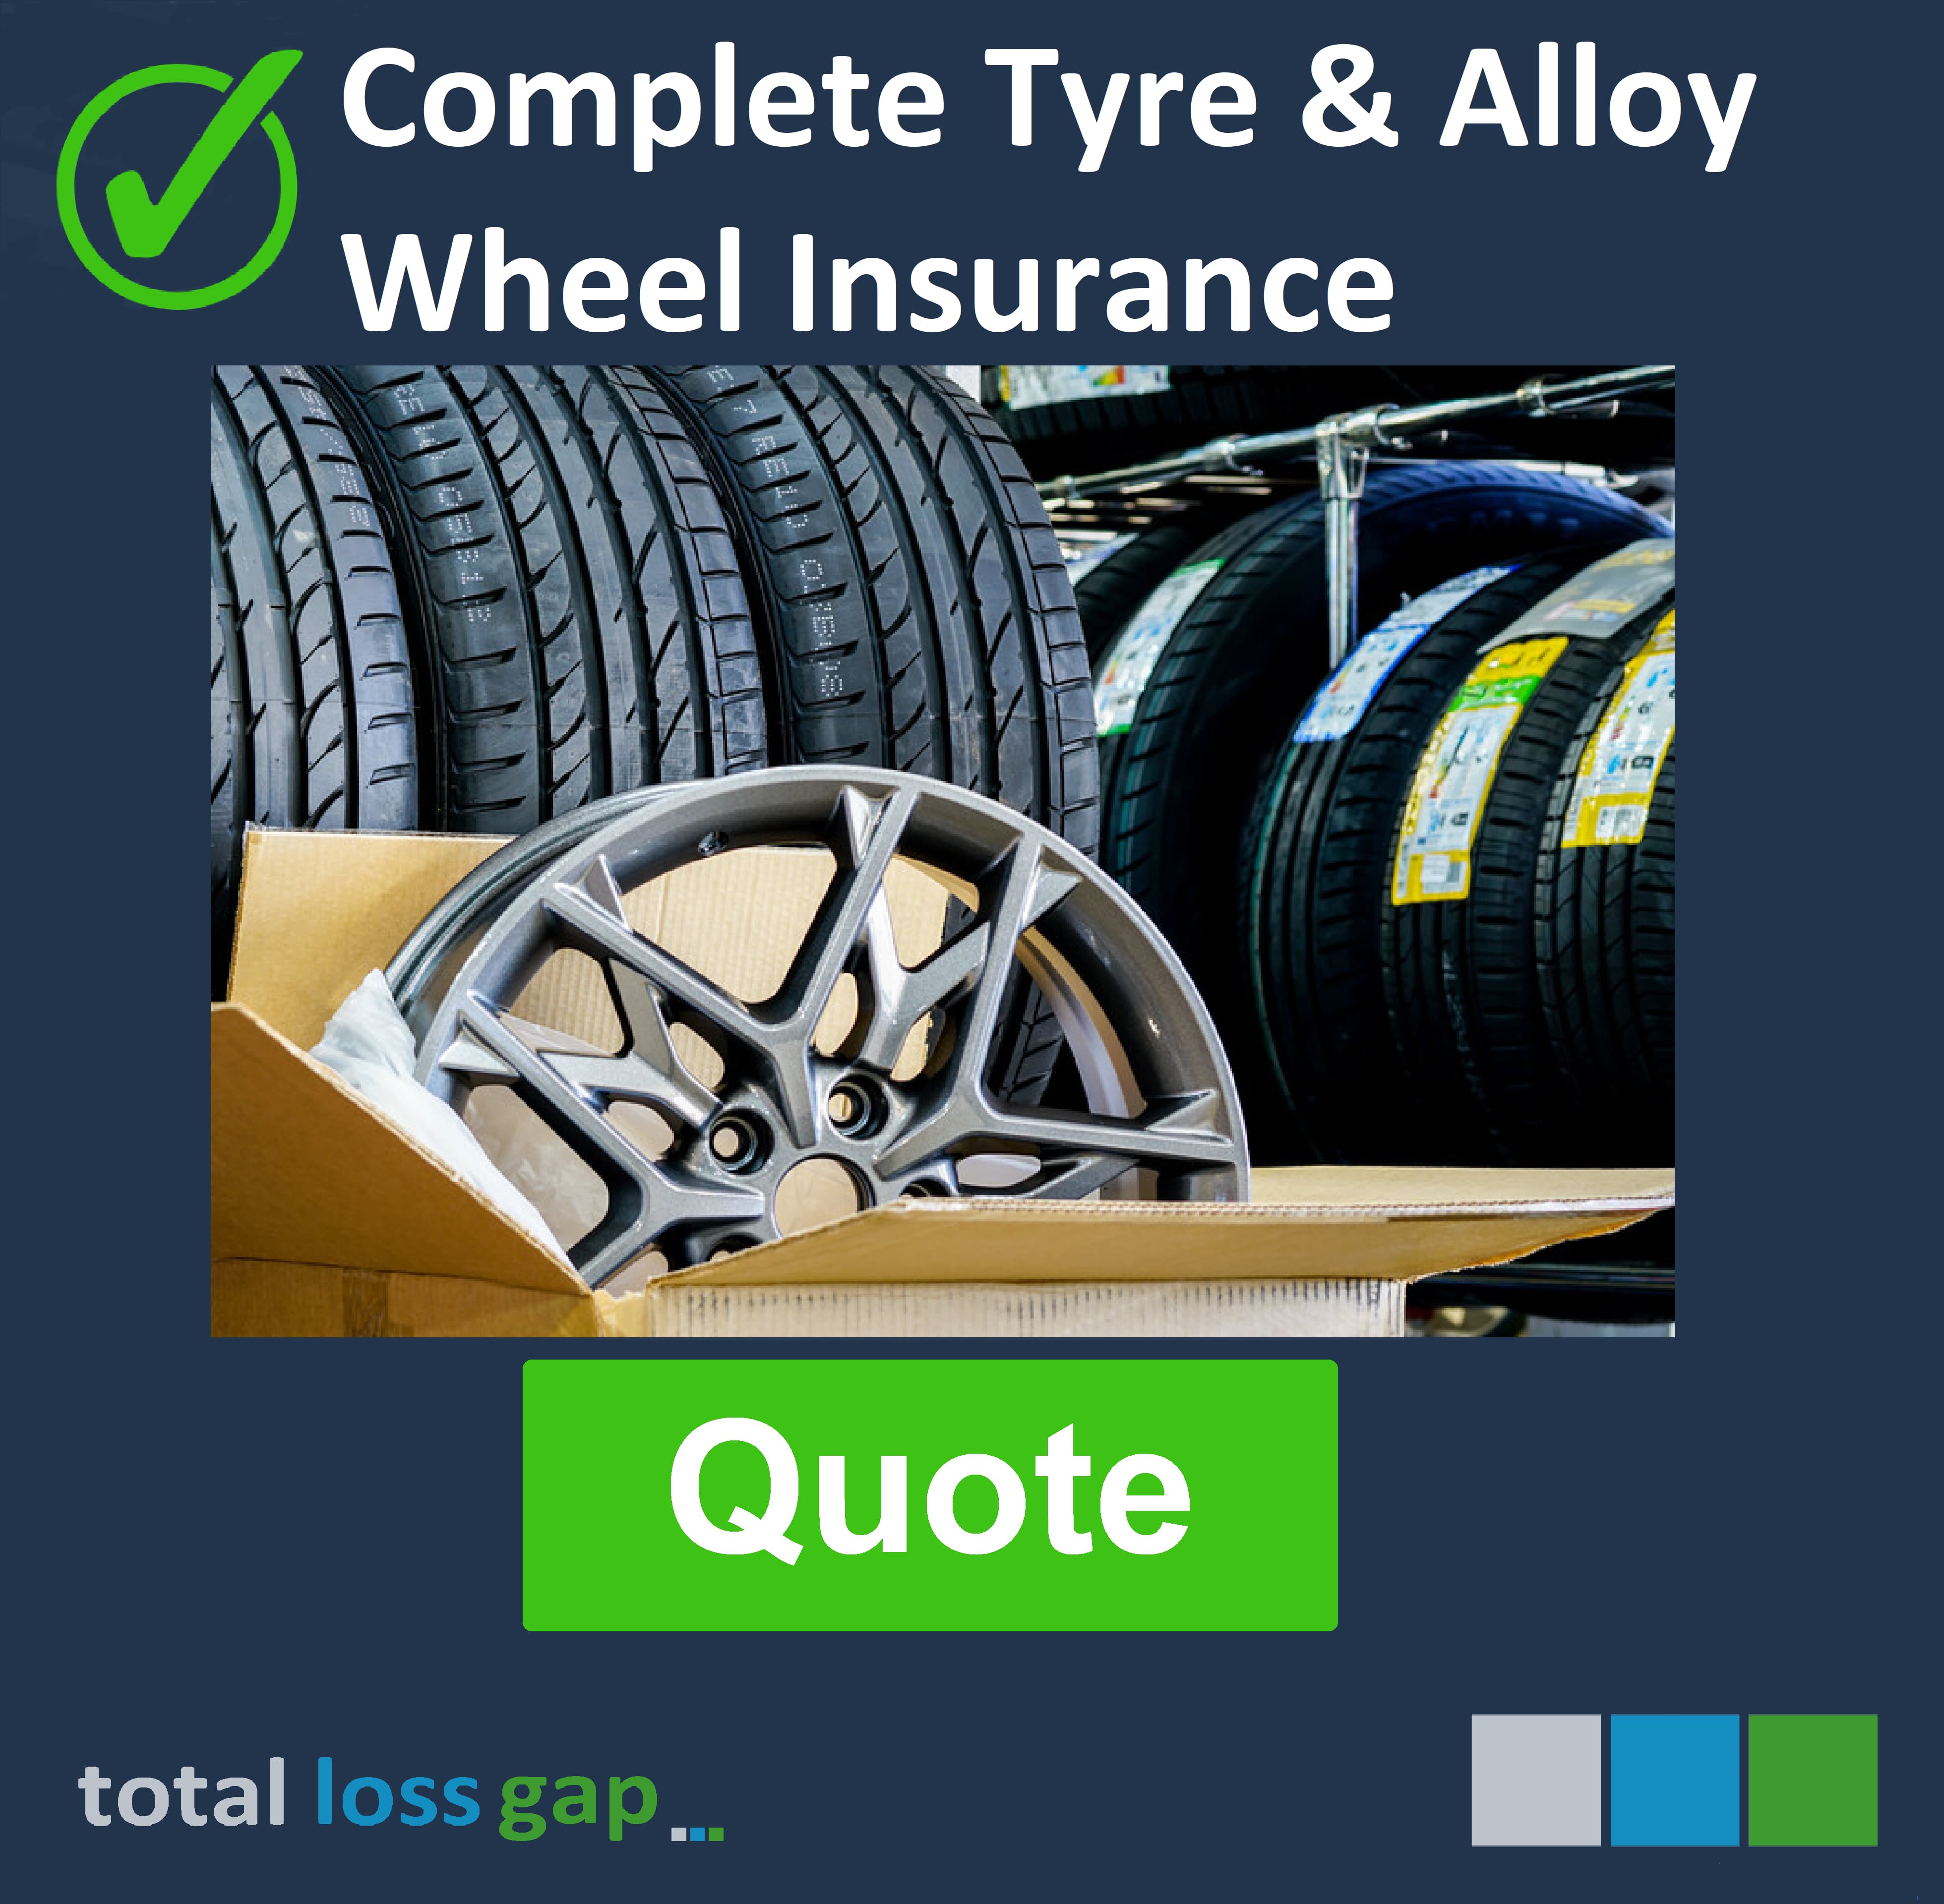 Tyre and Alloy Wheel insurance for your New Hyundai